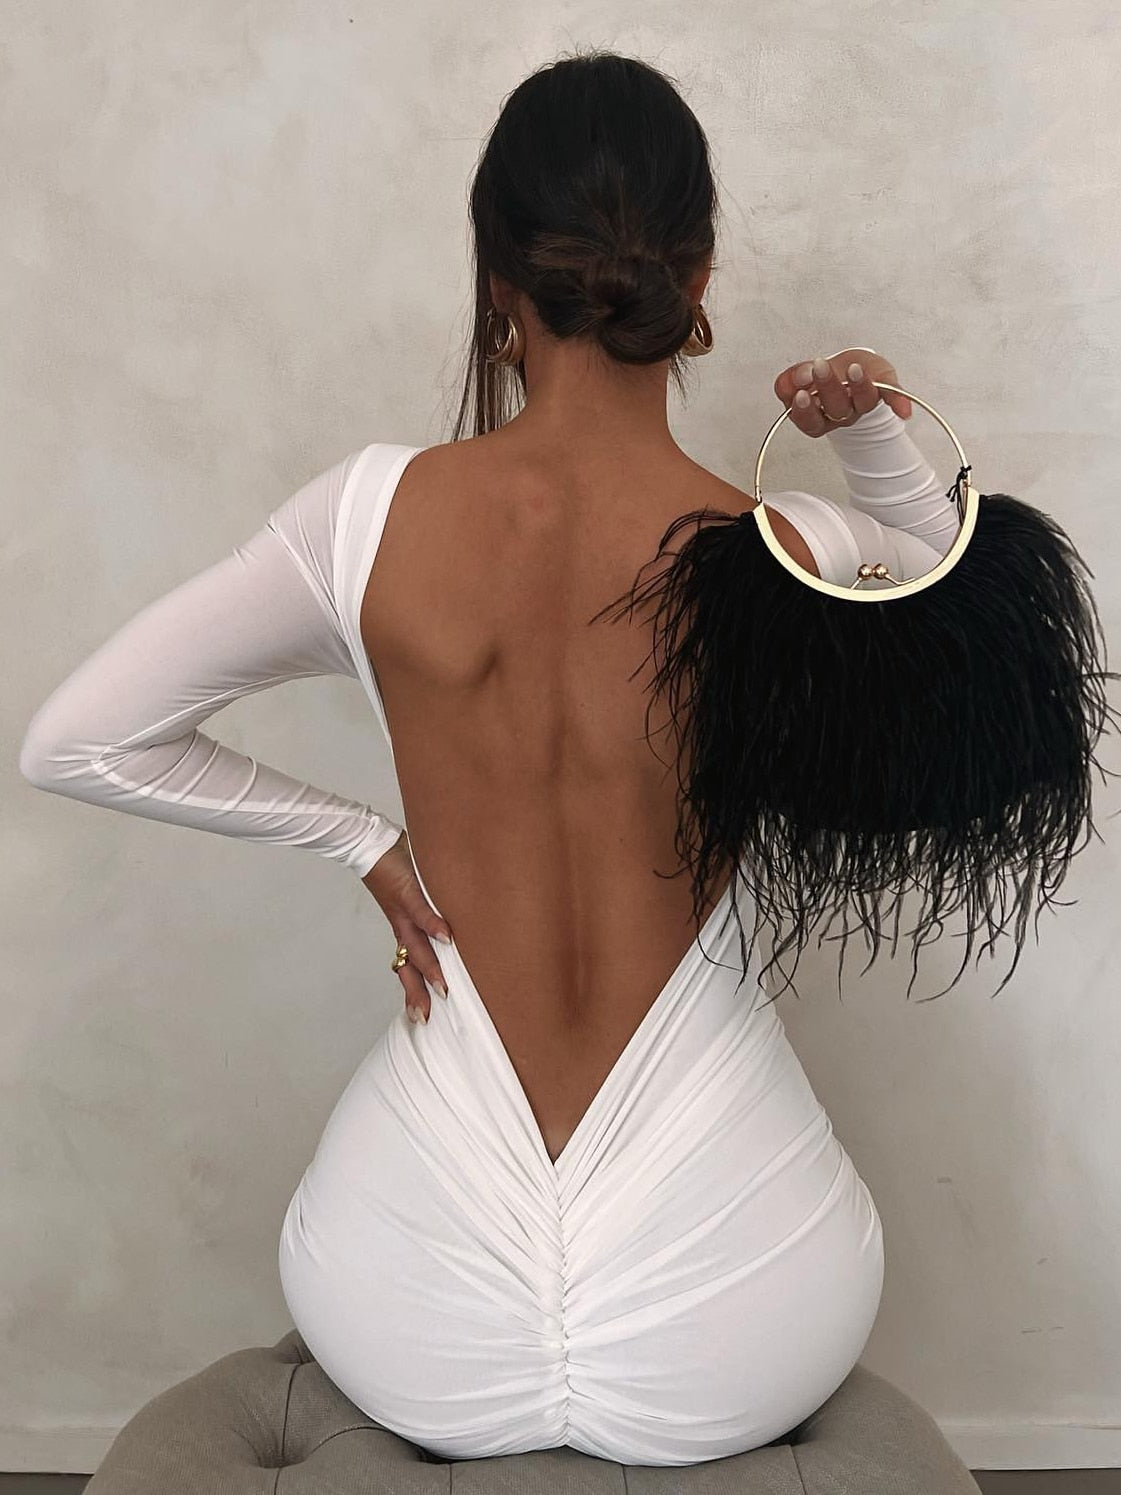 White Maxi Dress Women Sexy Backless Draped Bodycon Dresses Autumn Winter Elegant Long Sleeve Evening Party Dress  Outfits